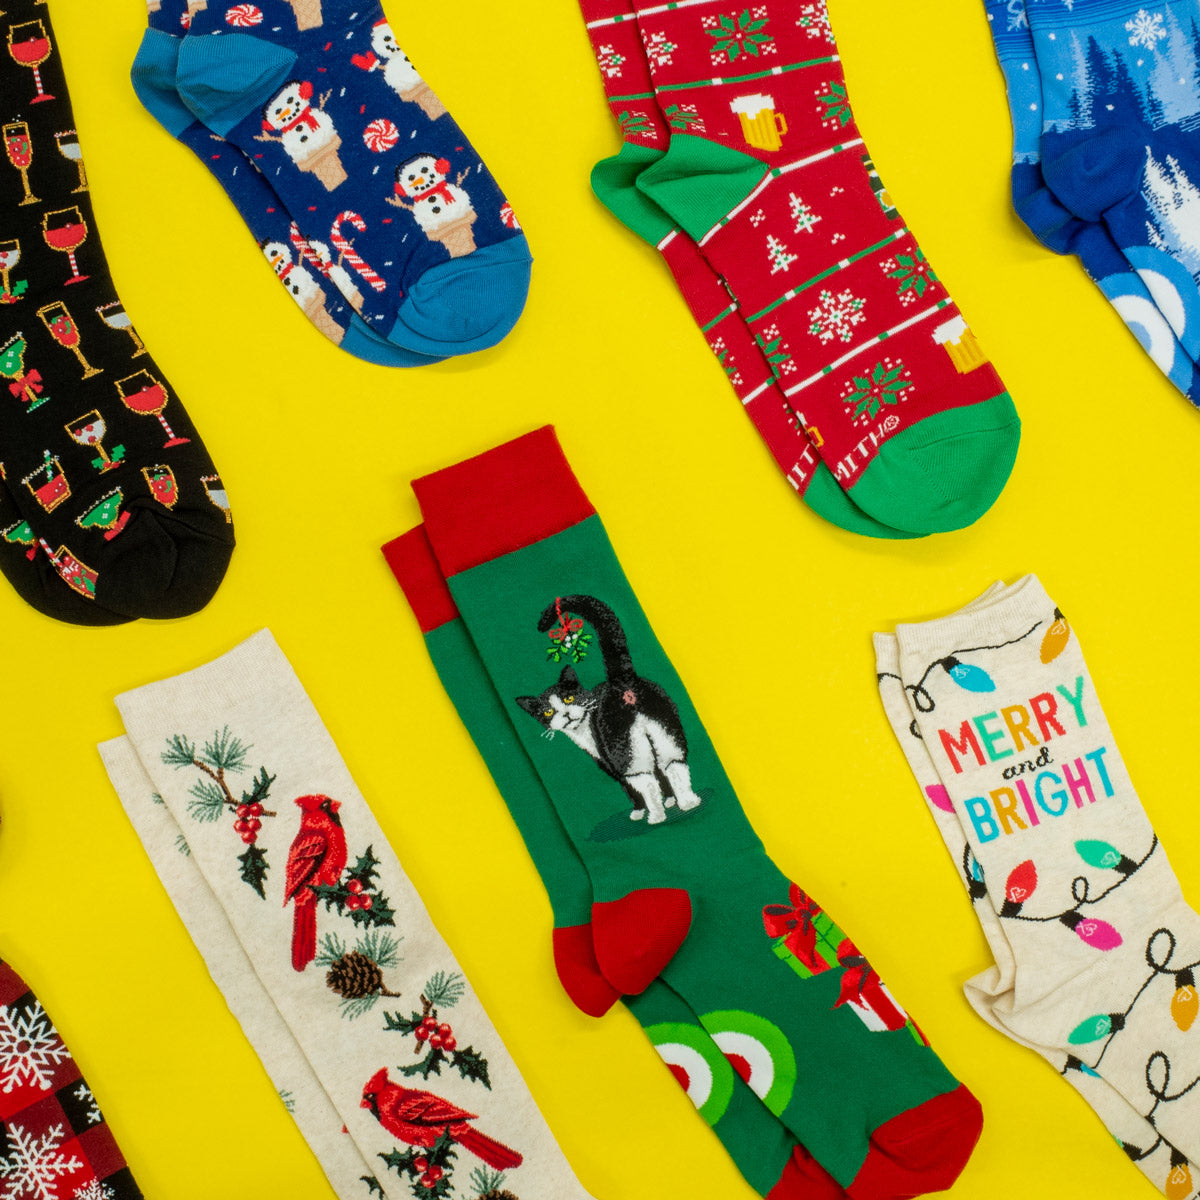 A mix of Christmas socks in different styles.